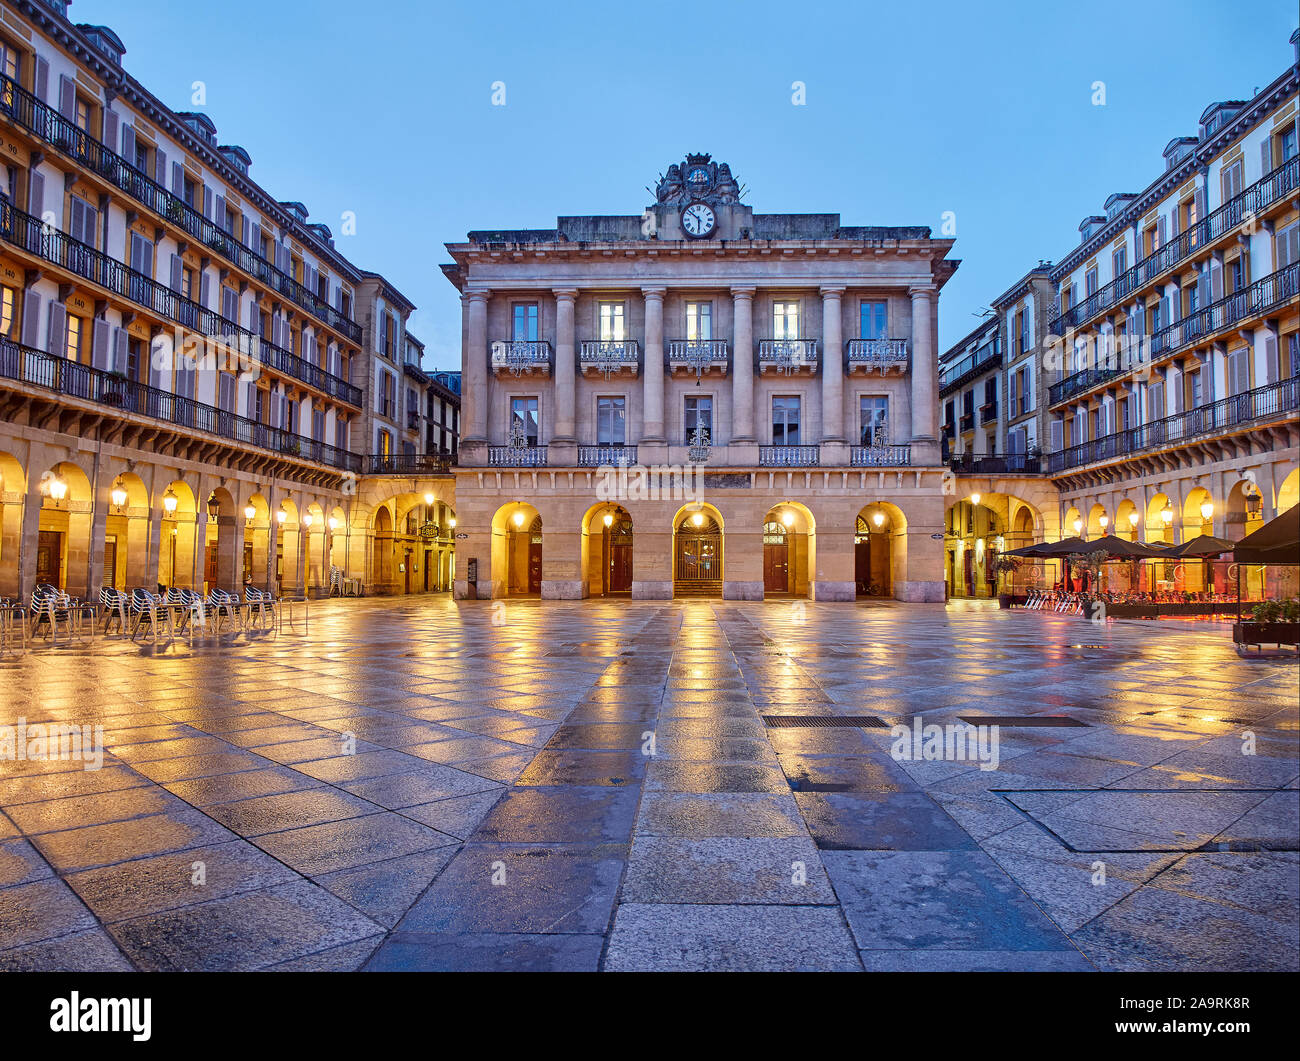 The Constitution square at nightfall (Plaza de la Constitucion). The central building in the background was, until 1947, the Town Hall of Donostia. Stock Photo